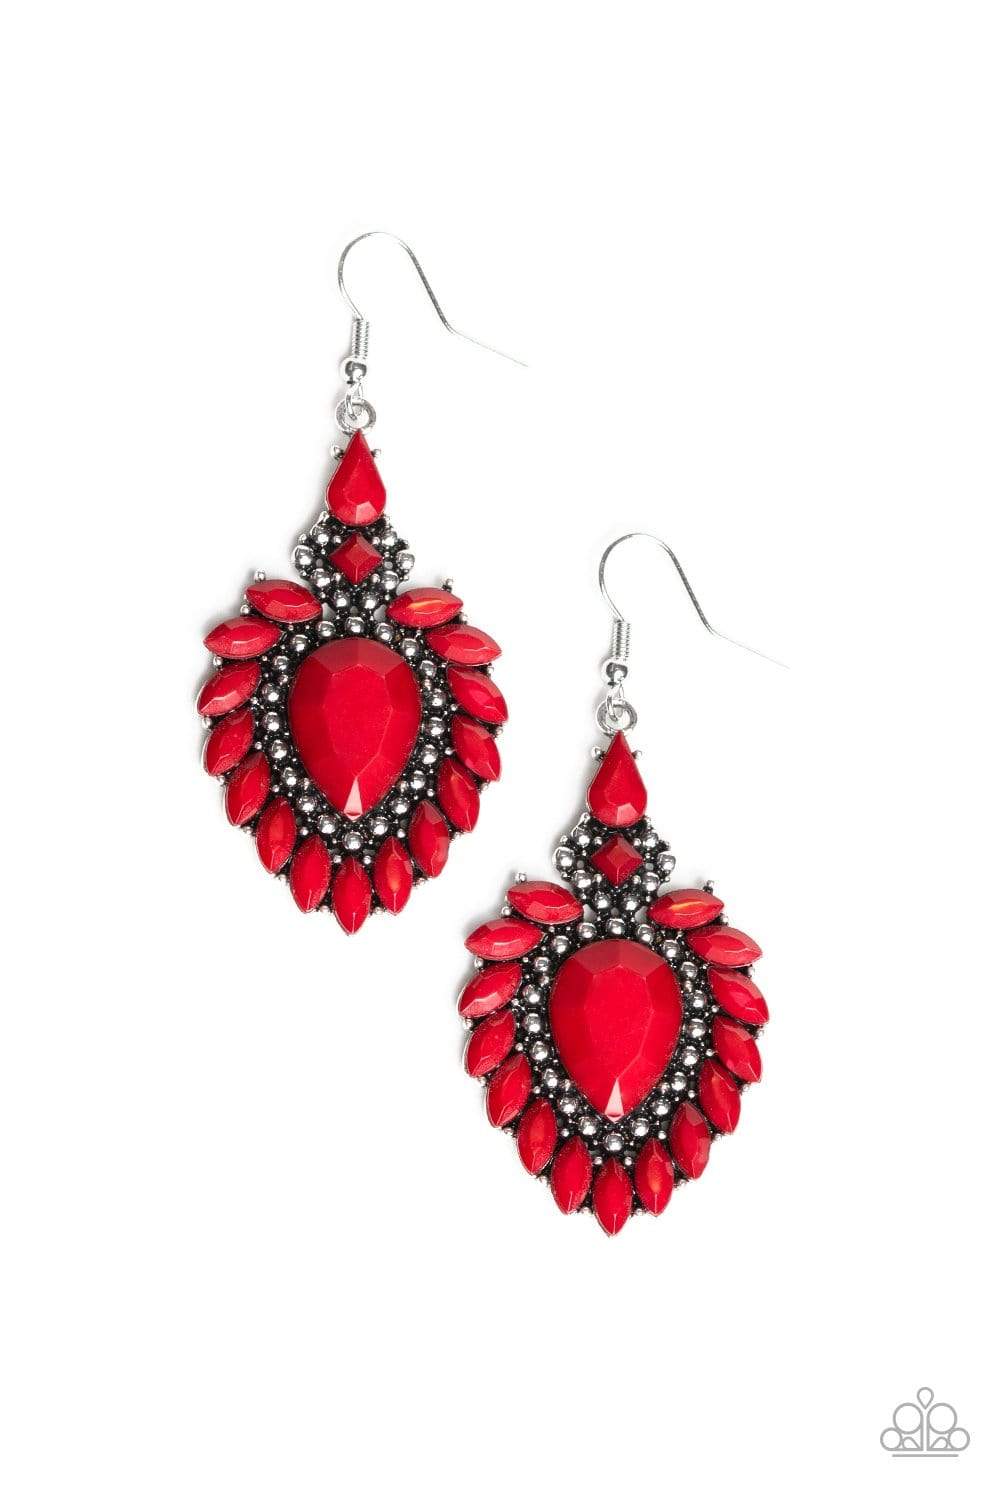 The LIONESS Den - Red - Paparazzi Earrings